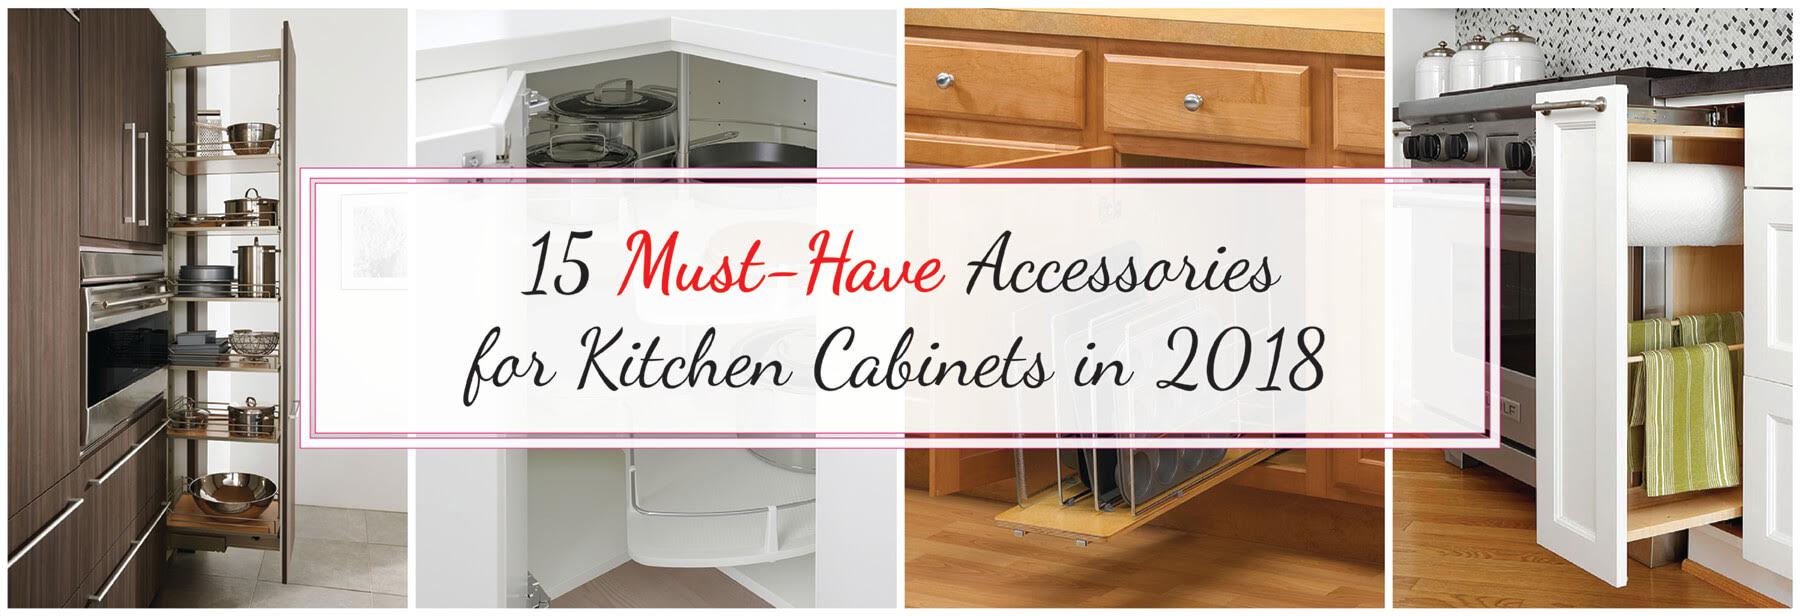 25 Must-Have Kitchen Features to Add Storage and Style